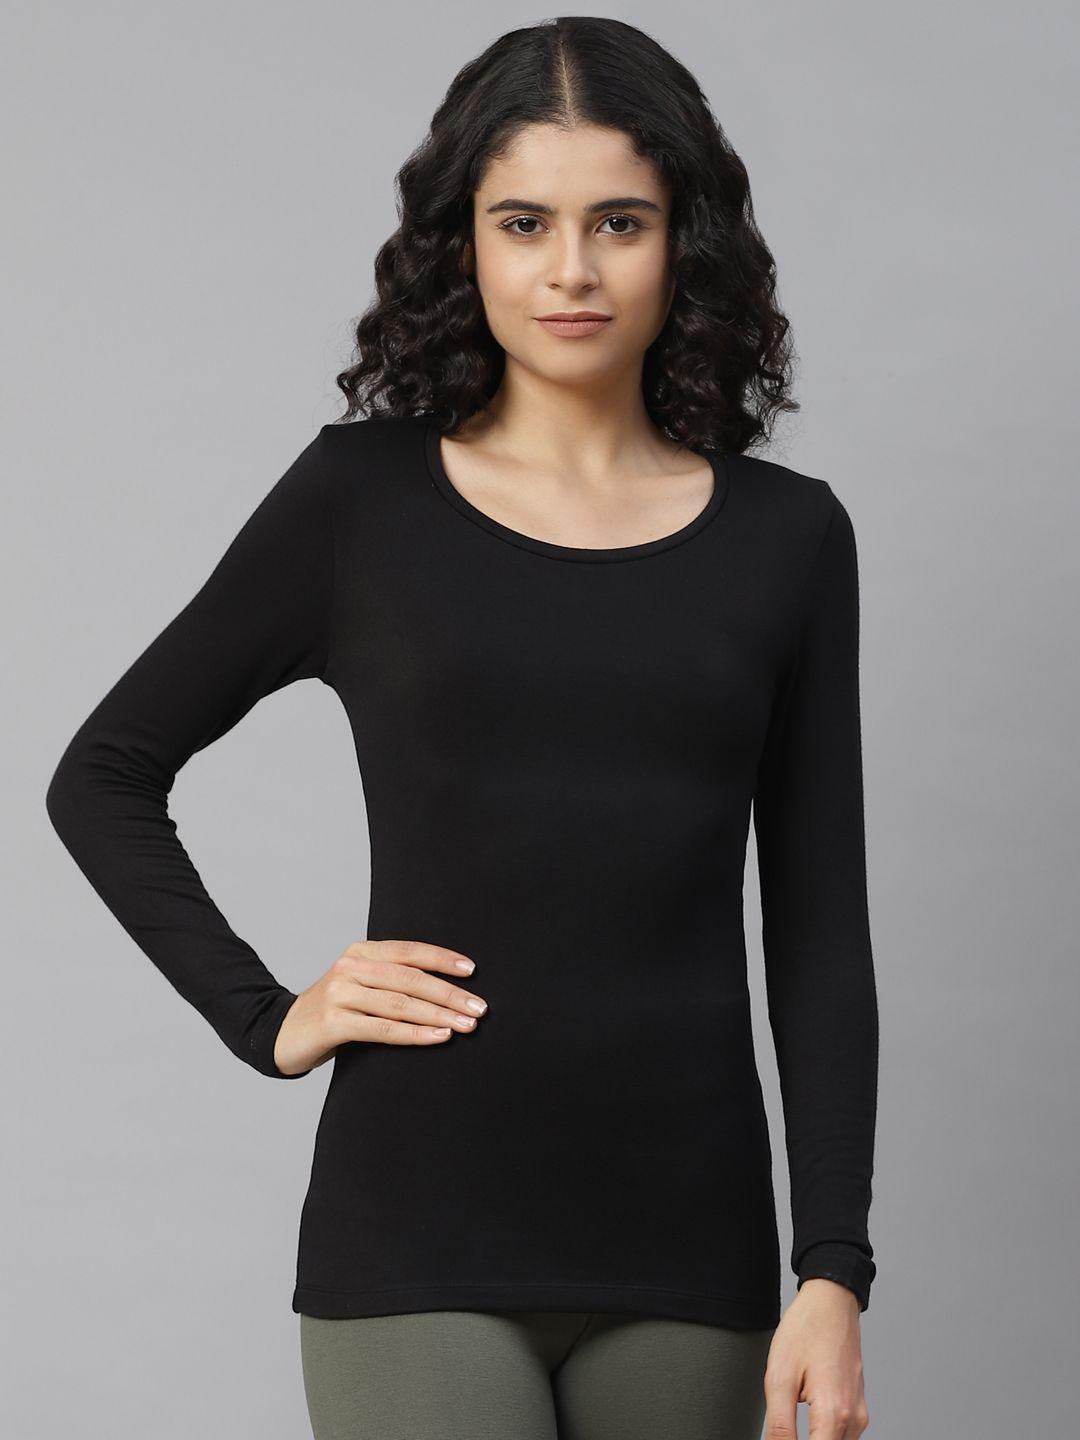 marks & spencer women black solid thermal top